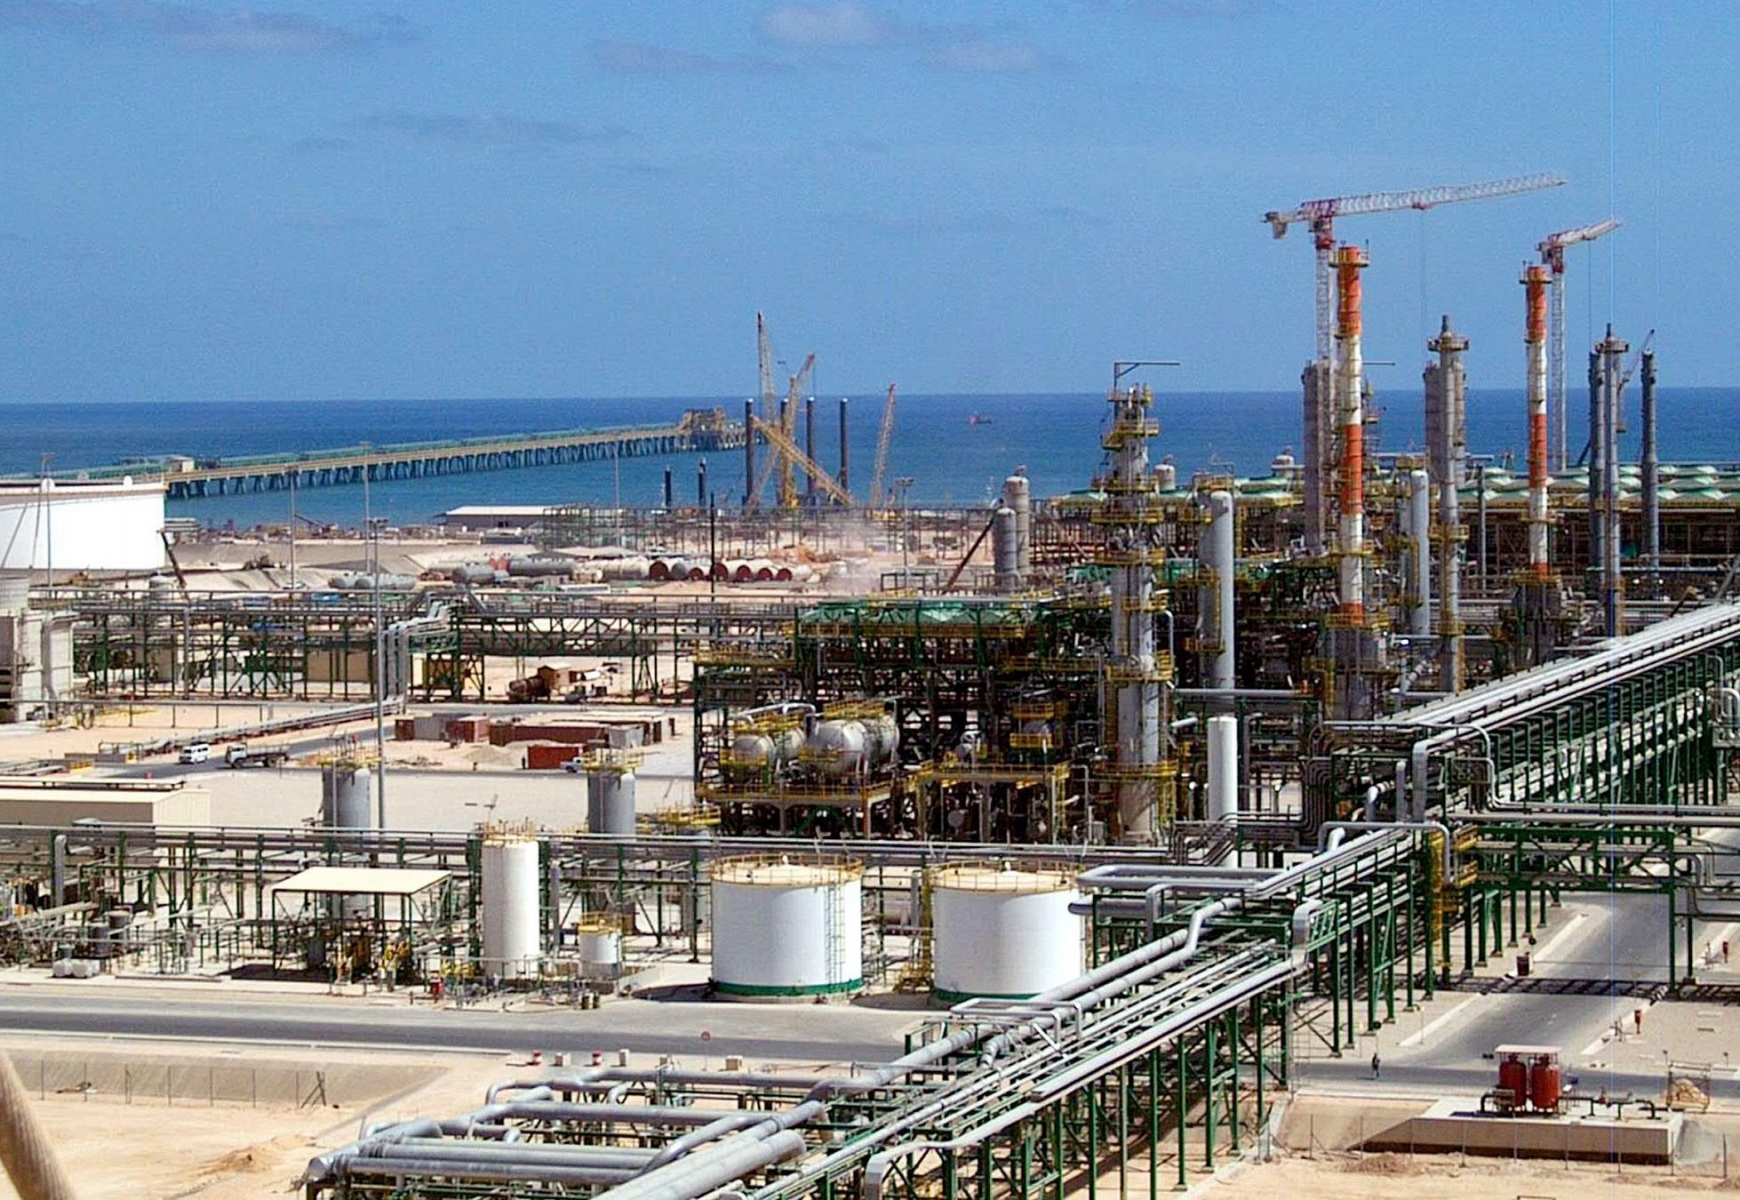 An undated but recent handout picture showing the new Eni (The Italian oil and gas company)  gas compression plant settled on the shore of Mellitah, Libya. The Mellitah plant is part of a new gas pipleine which will connect Libya to the Italian island of Sicily and will be inaugurated by Libyan leader Moammar Ghadafi and Italian Premier Silvio Berlusconi, Thursday, Oct. 7, 2004. (KEYSTONE/AP Photo/Eni Press office)   ===  === === HANDOUT, NO SALES ===  LIBYEN ITALIEN OEL PLATTFORM